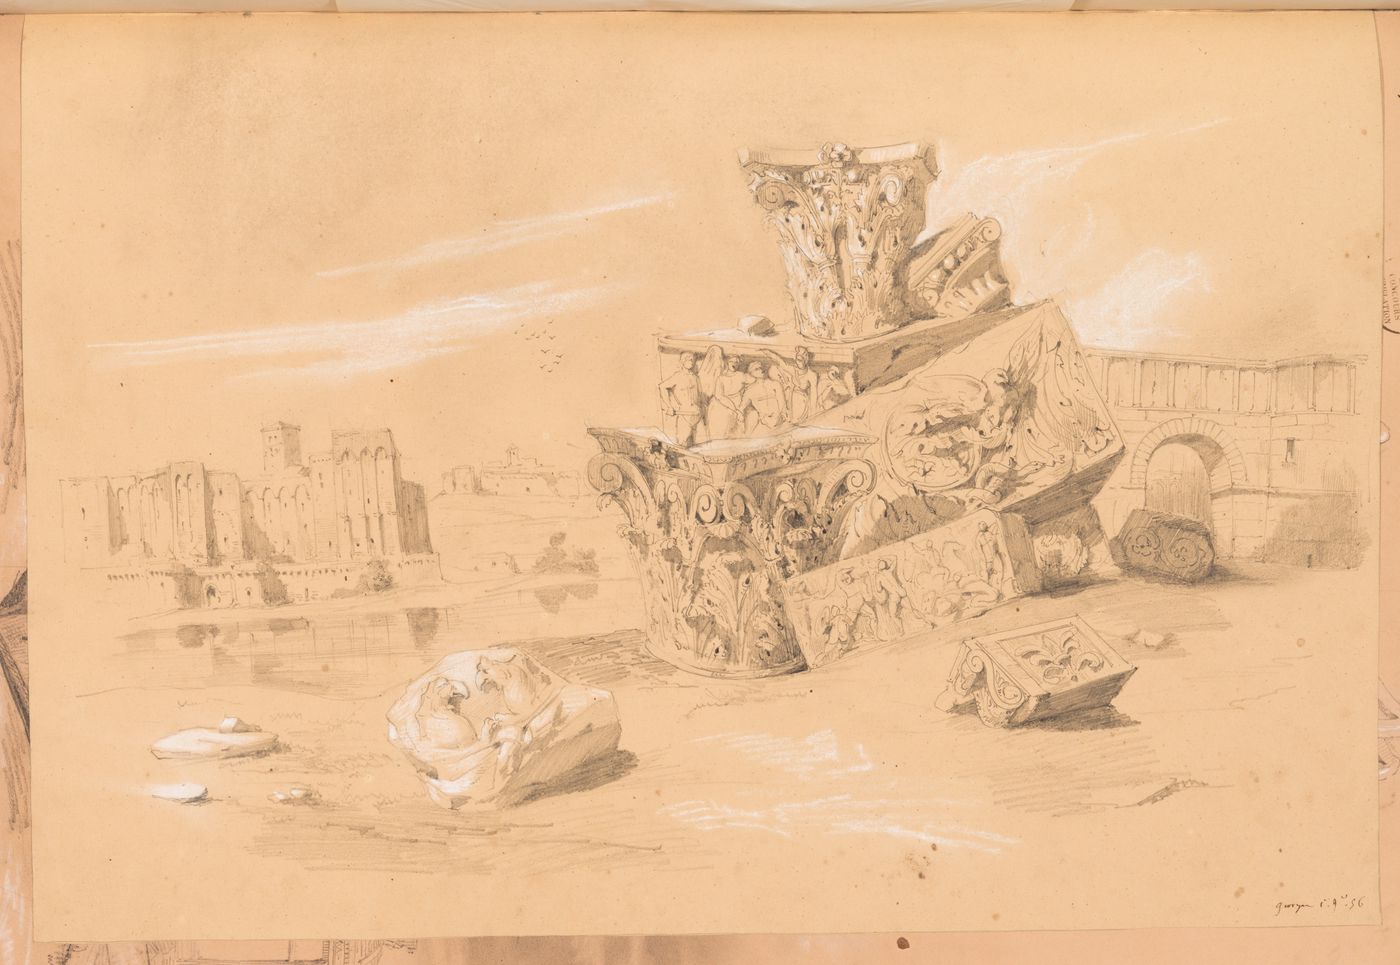 Study of architectural fragments with a citadel and an entrance archway